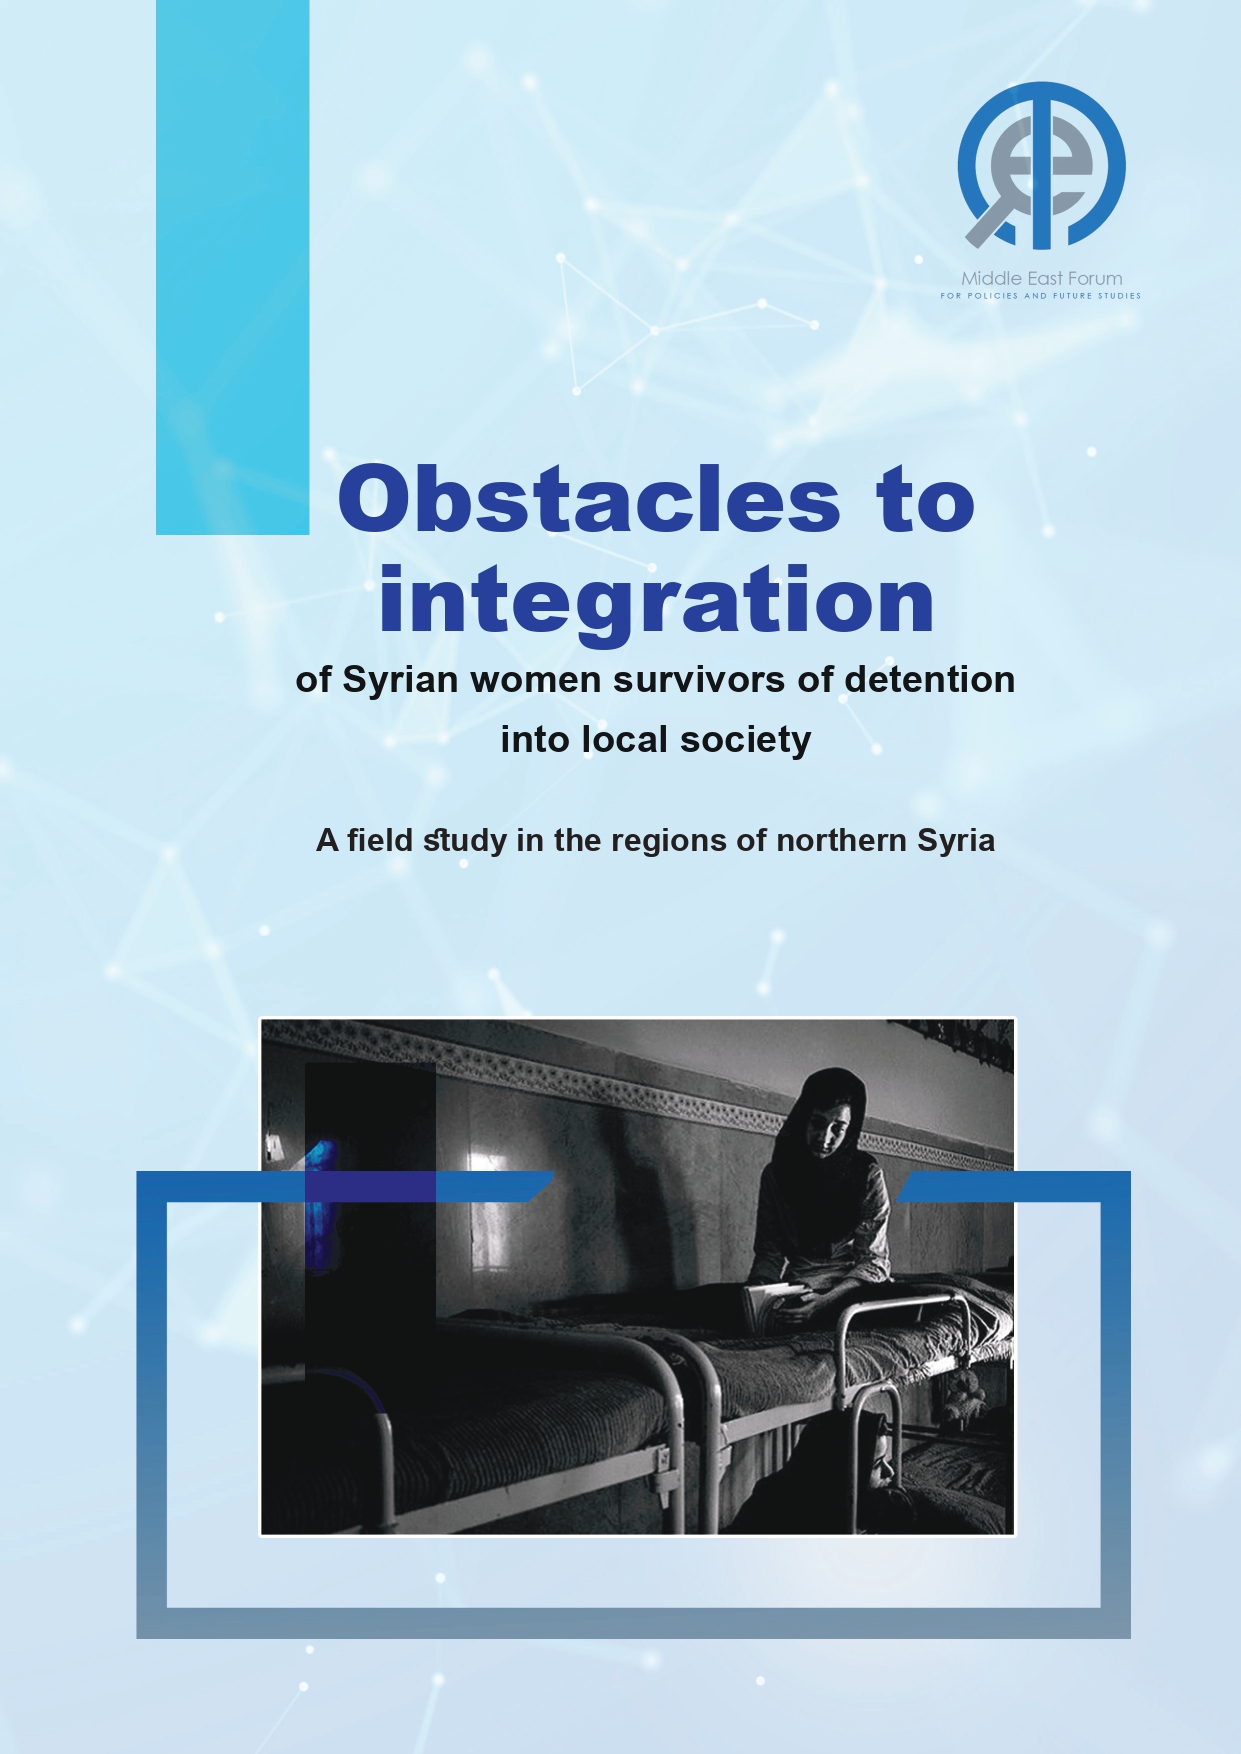 Obstacles to integration of Syrian women survivors of detention into local society - A field study in the regions of northern Syria